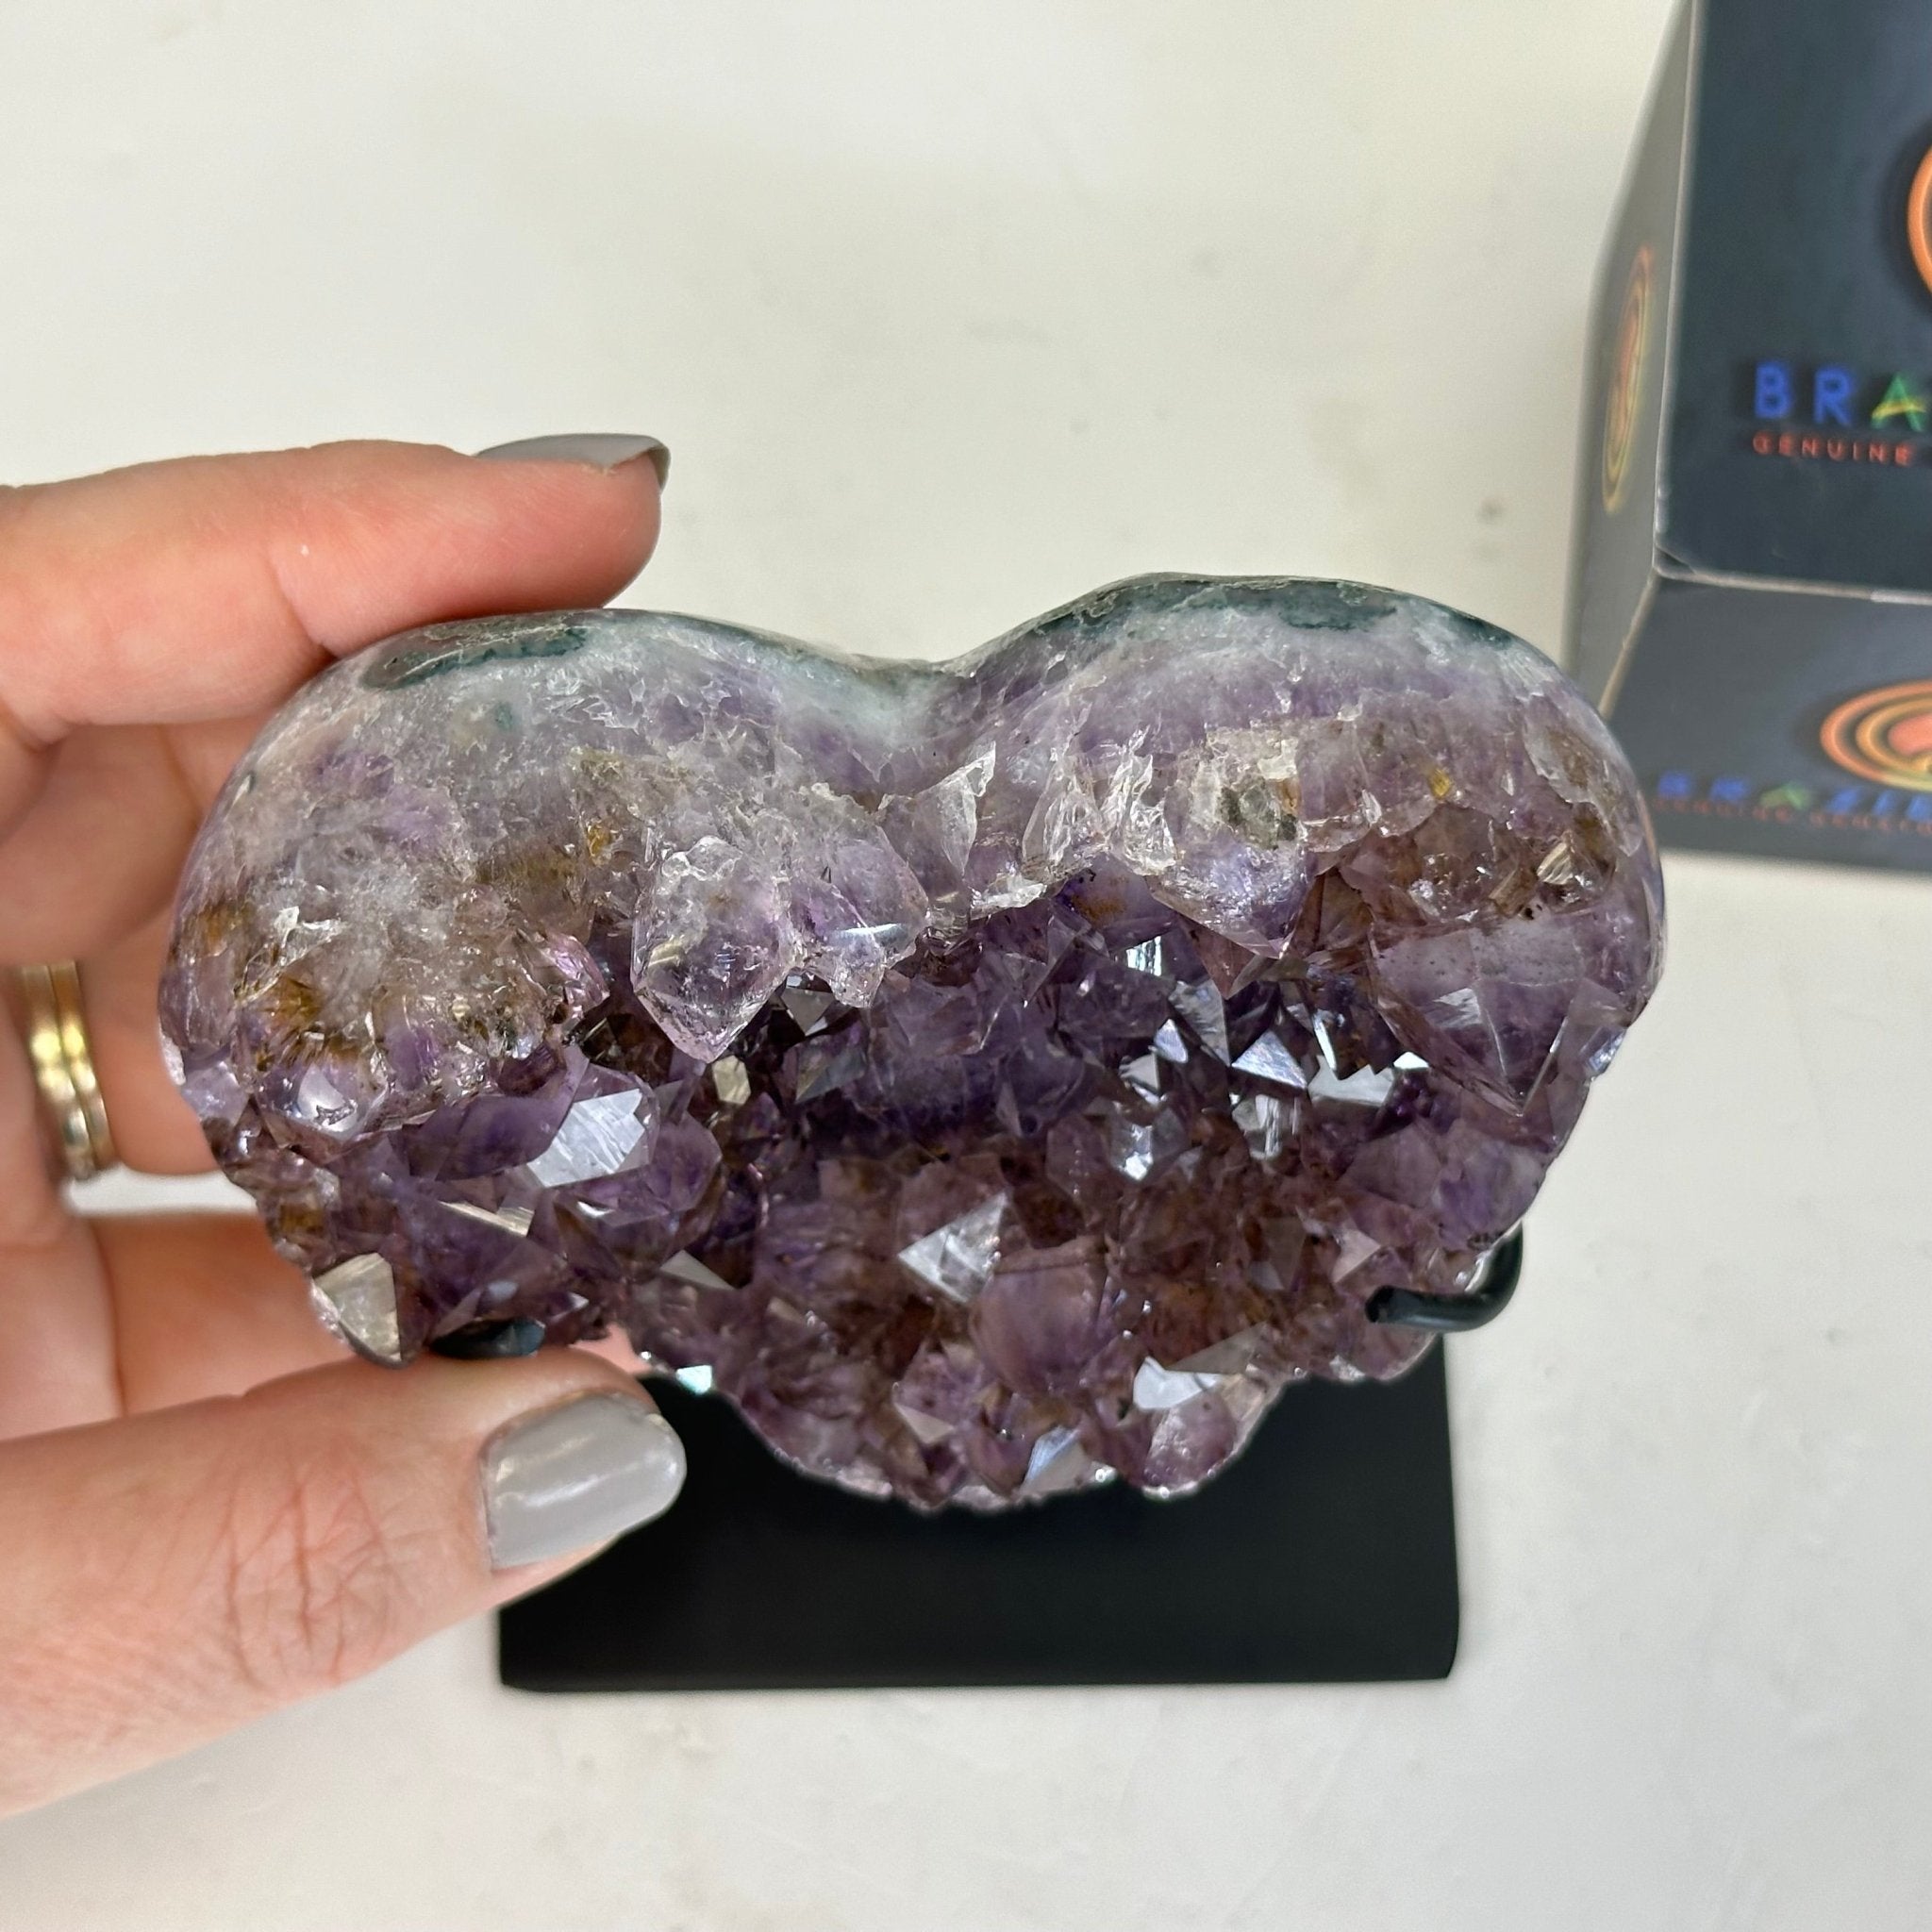 Extra Quality Amethyst Heart Geode w/ metal stand, 1.3 lbs & 5.5" Tall #5463-0297 - Brazil GemsBrazil GemsExtra Quality Amethyst Heart Geode w/ metal stand, 1.3 lbs & 5.5" Tall #5463-0297Hearts5463-0297